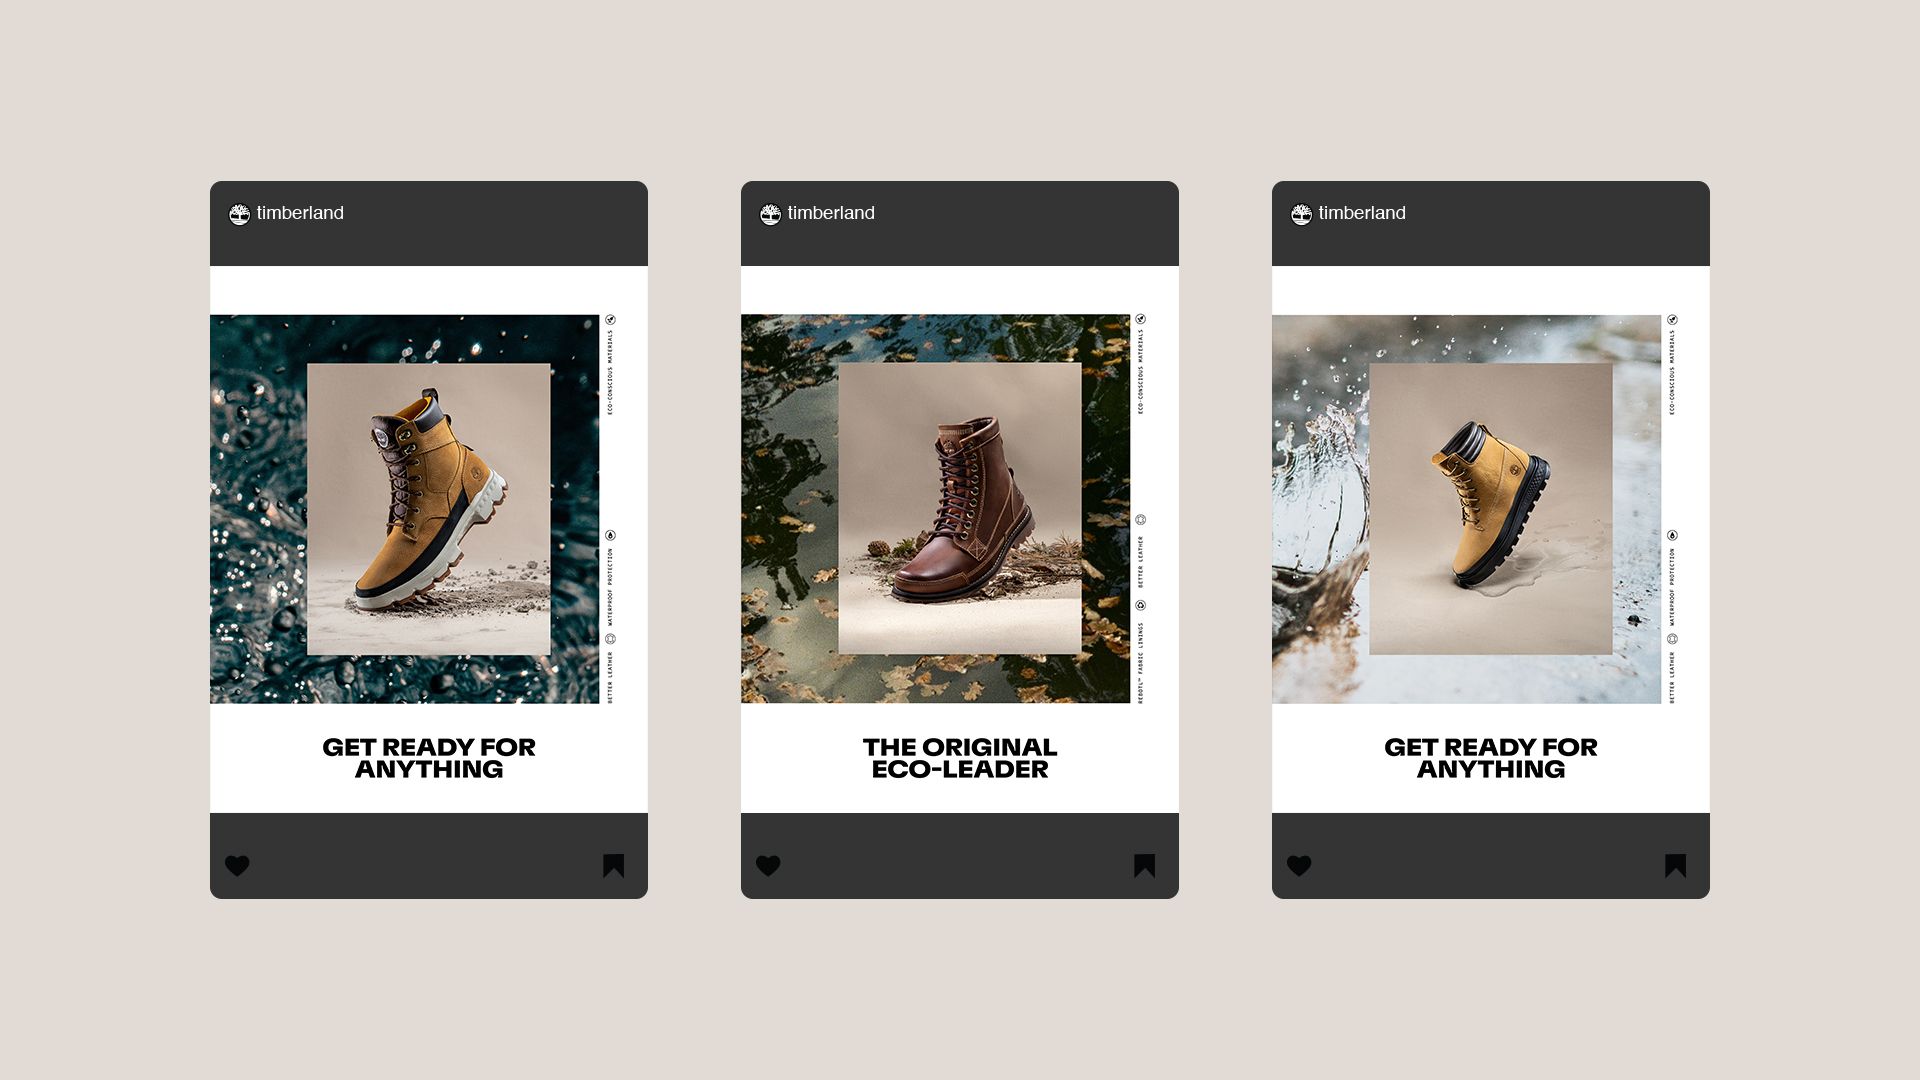 Three social media posts from @timberland featuring taglines Get Ready for Anything and The original eco-leader